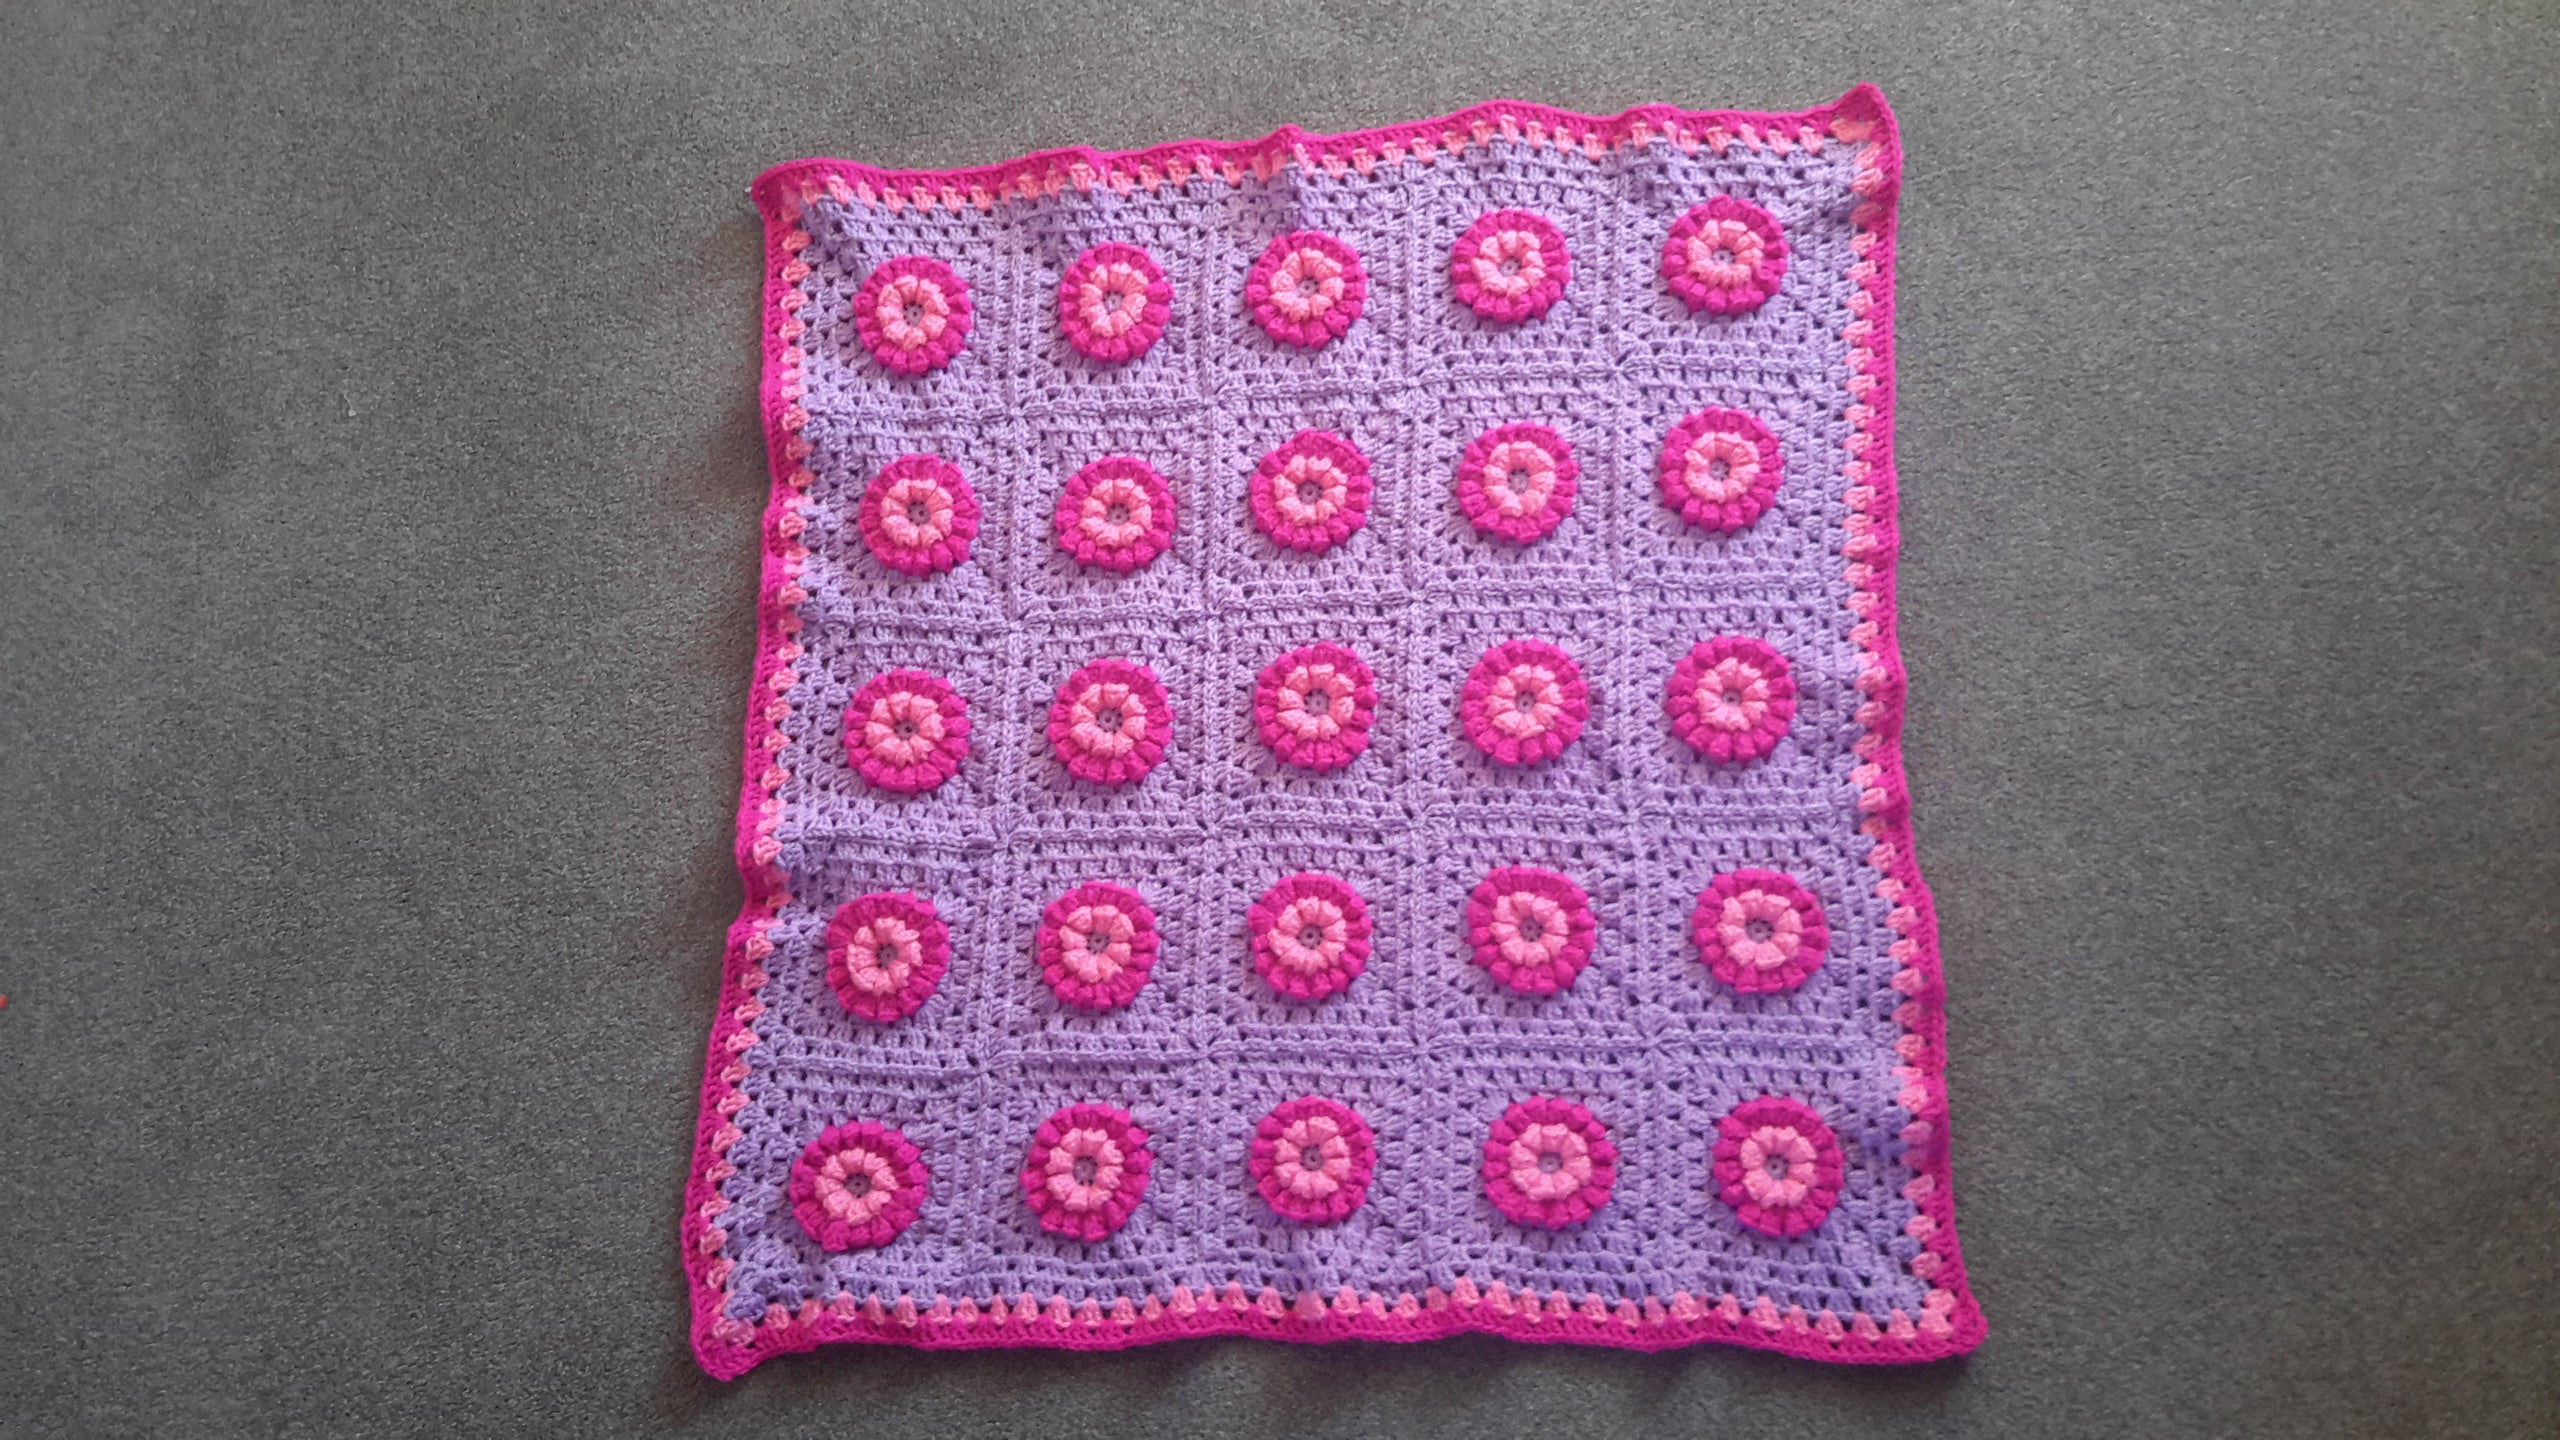 The Easy Peasy Blanket: How To Crochet A Snug Granny Square